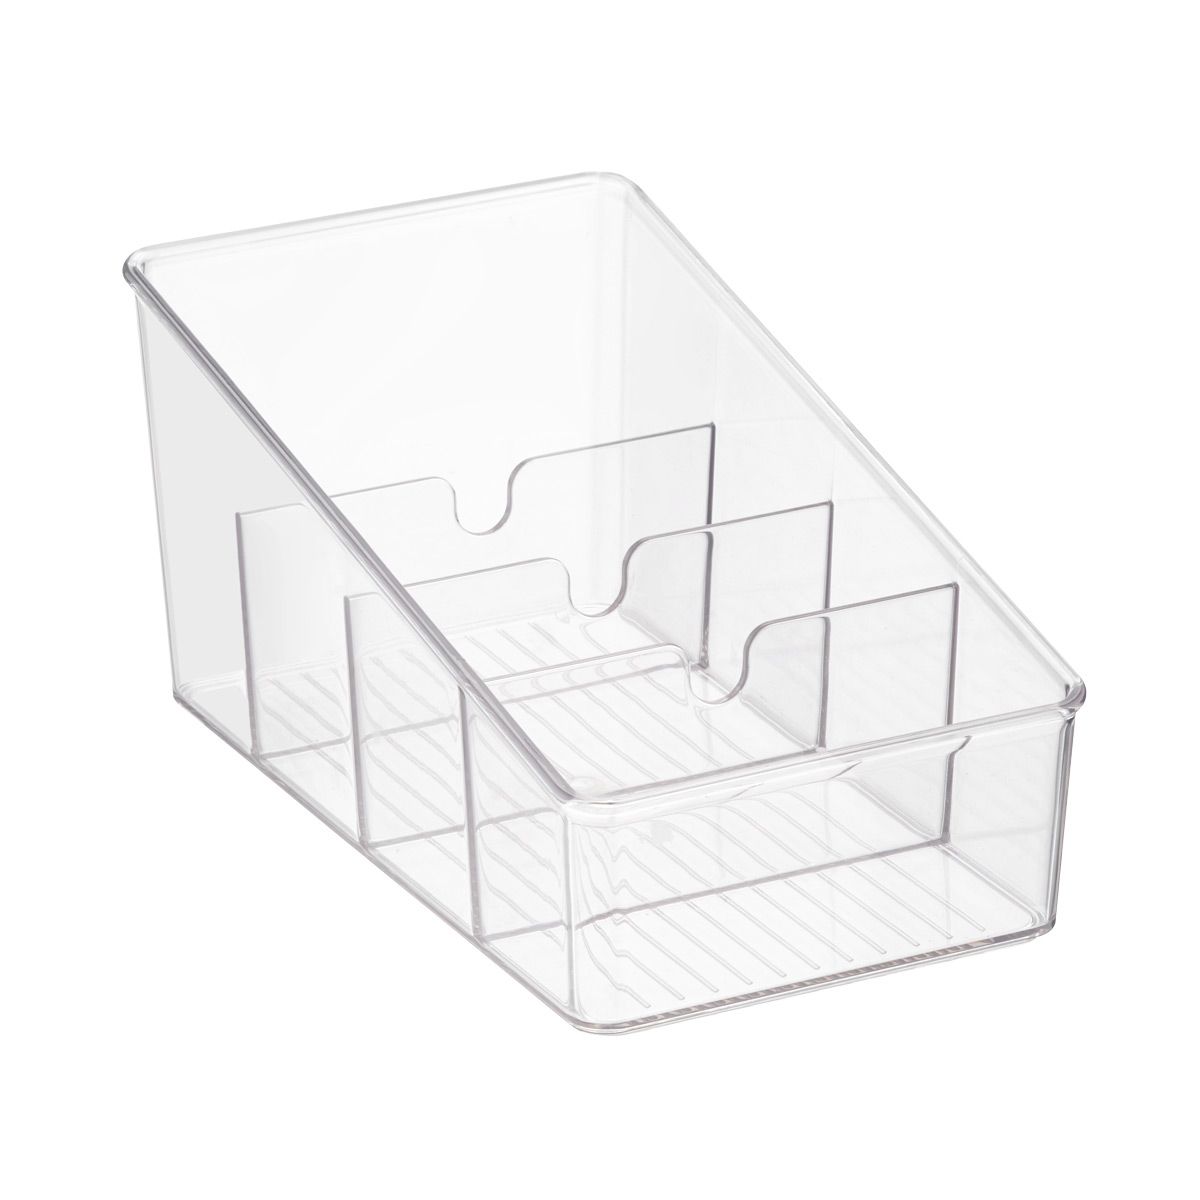 Linus^ Packet Organizer | The Container Store